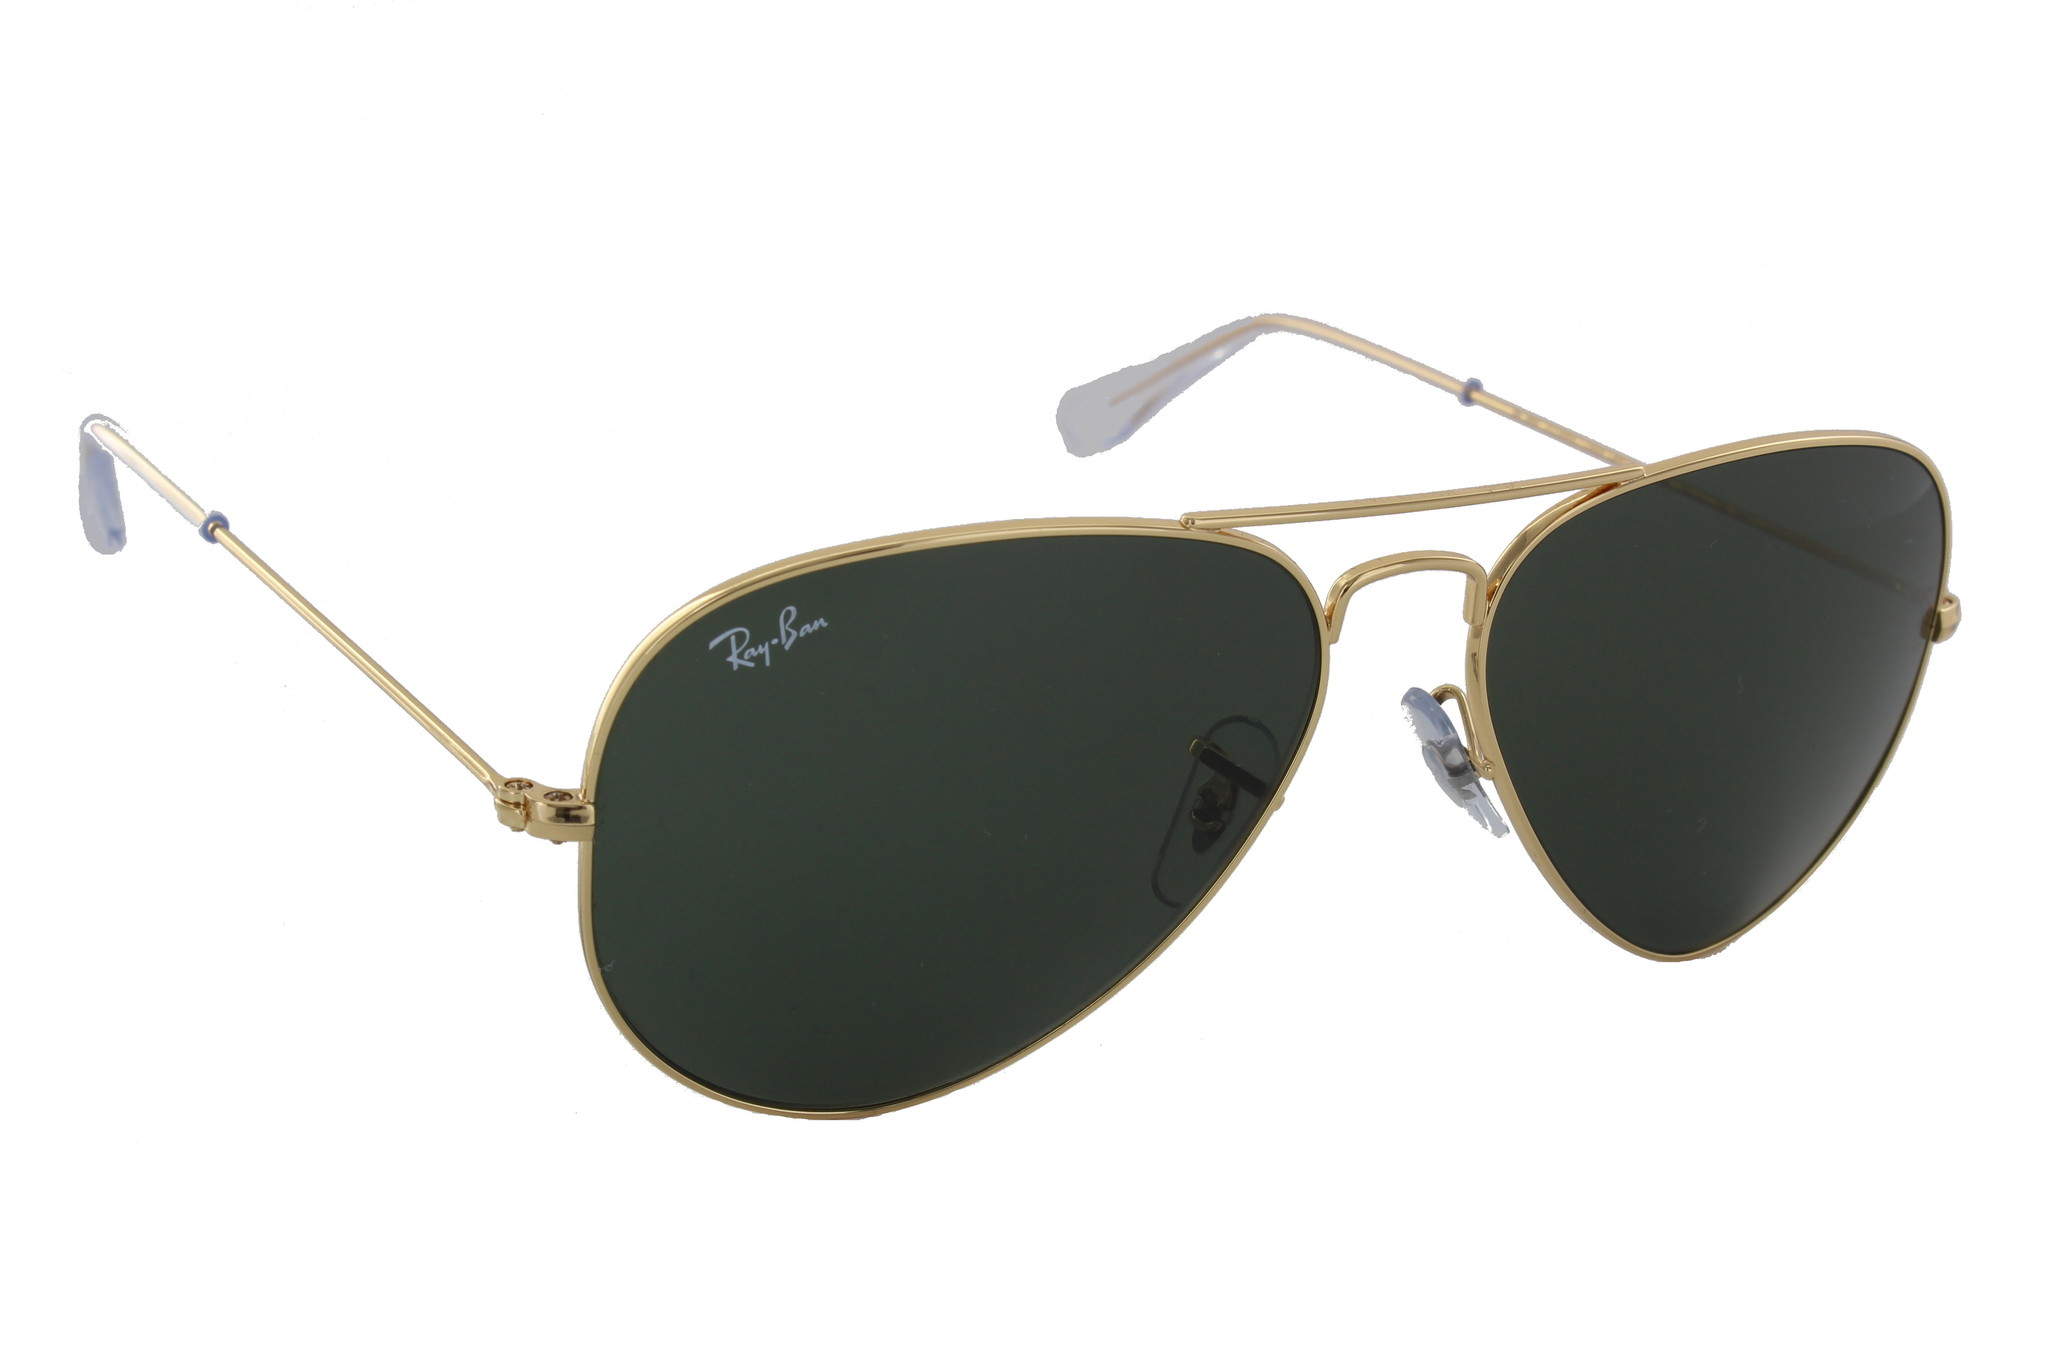 Ray-Ban - RB3025 - L0205 - 58 -14-135 